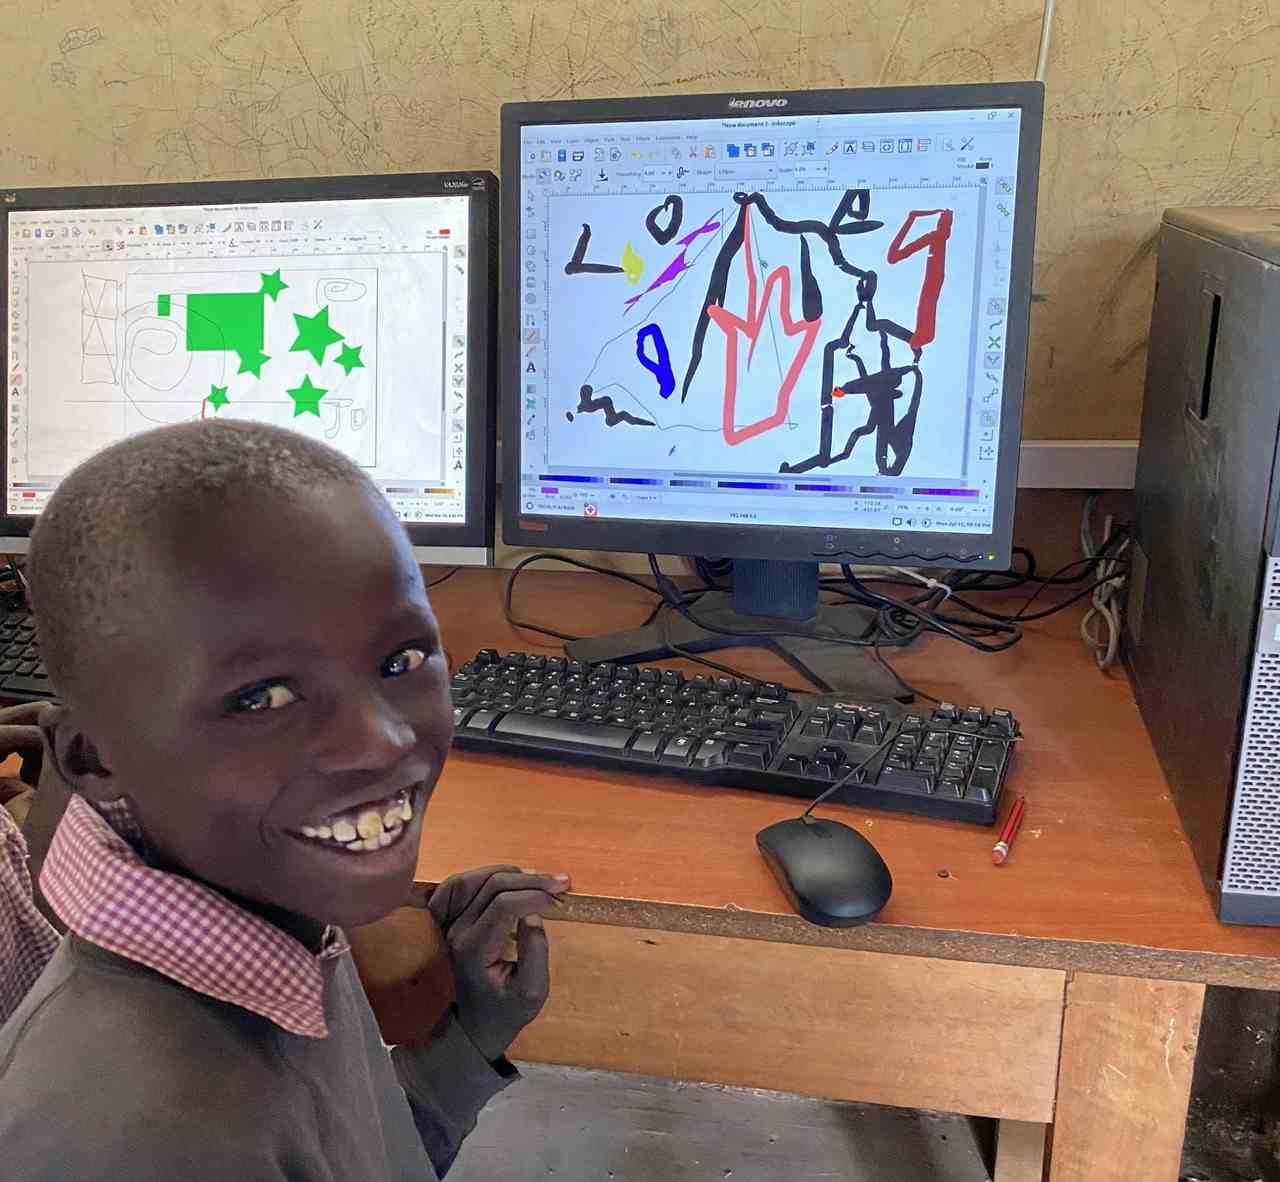 Student at Barina showing his abstract art on inkscape